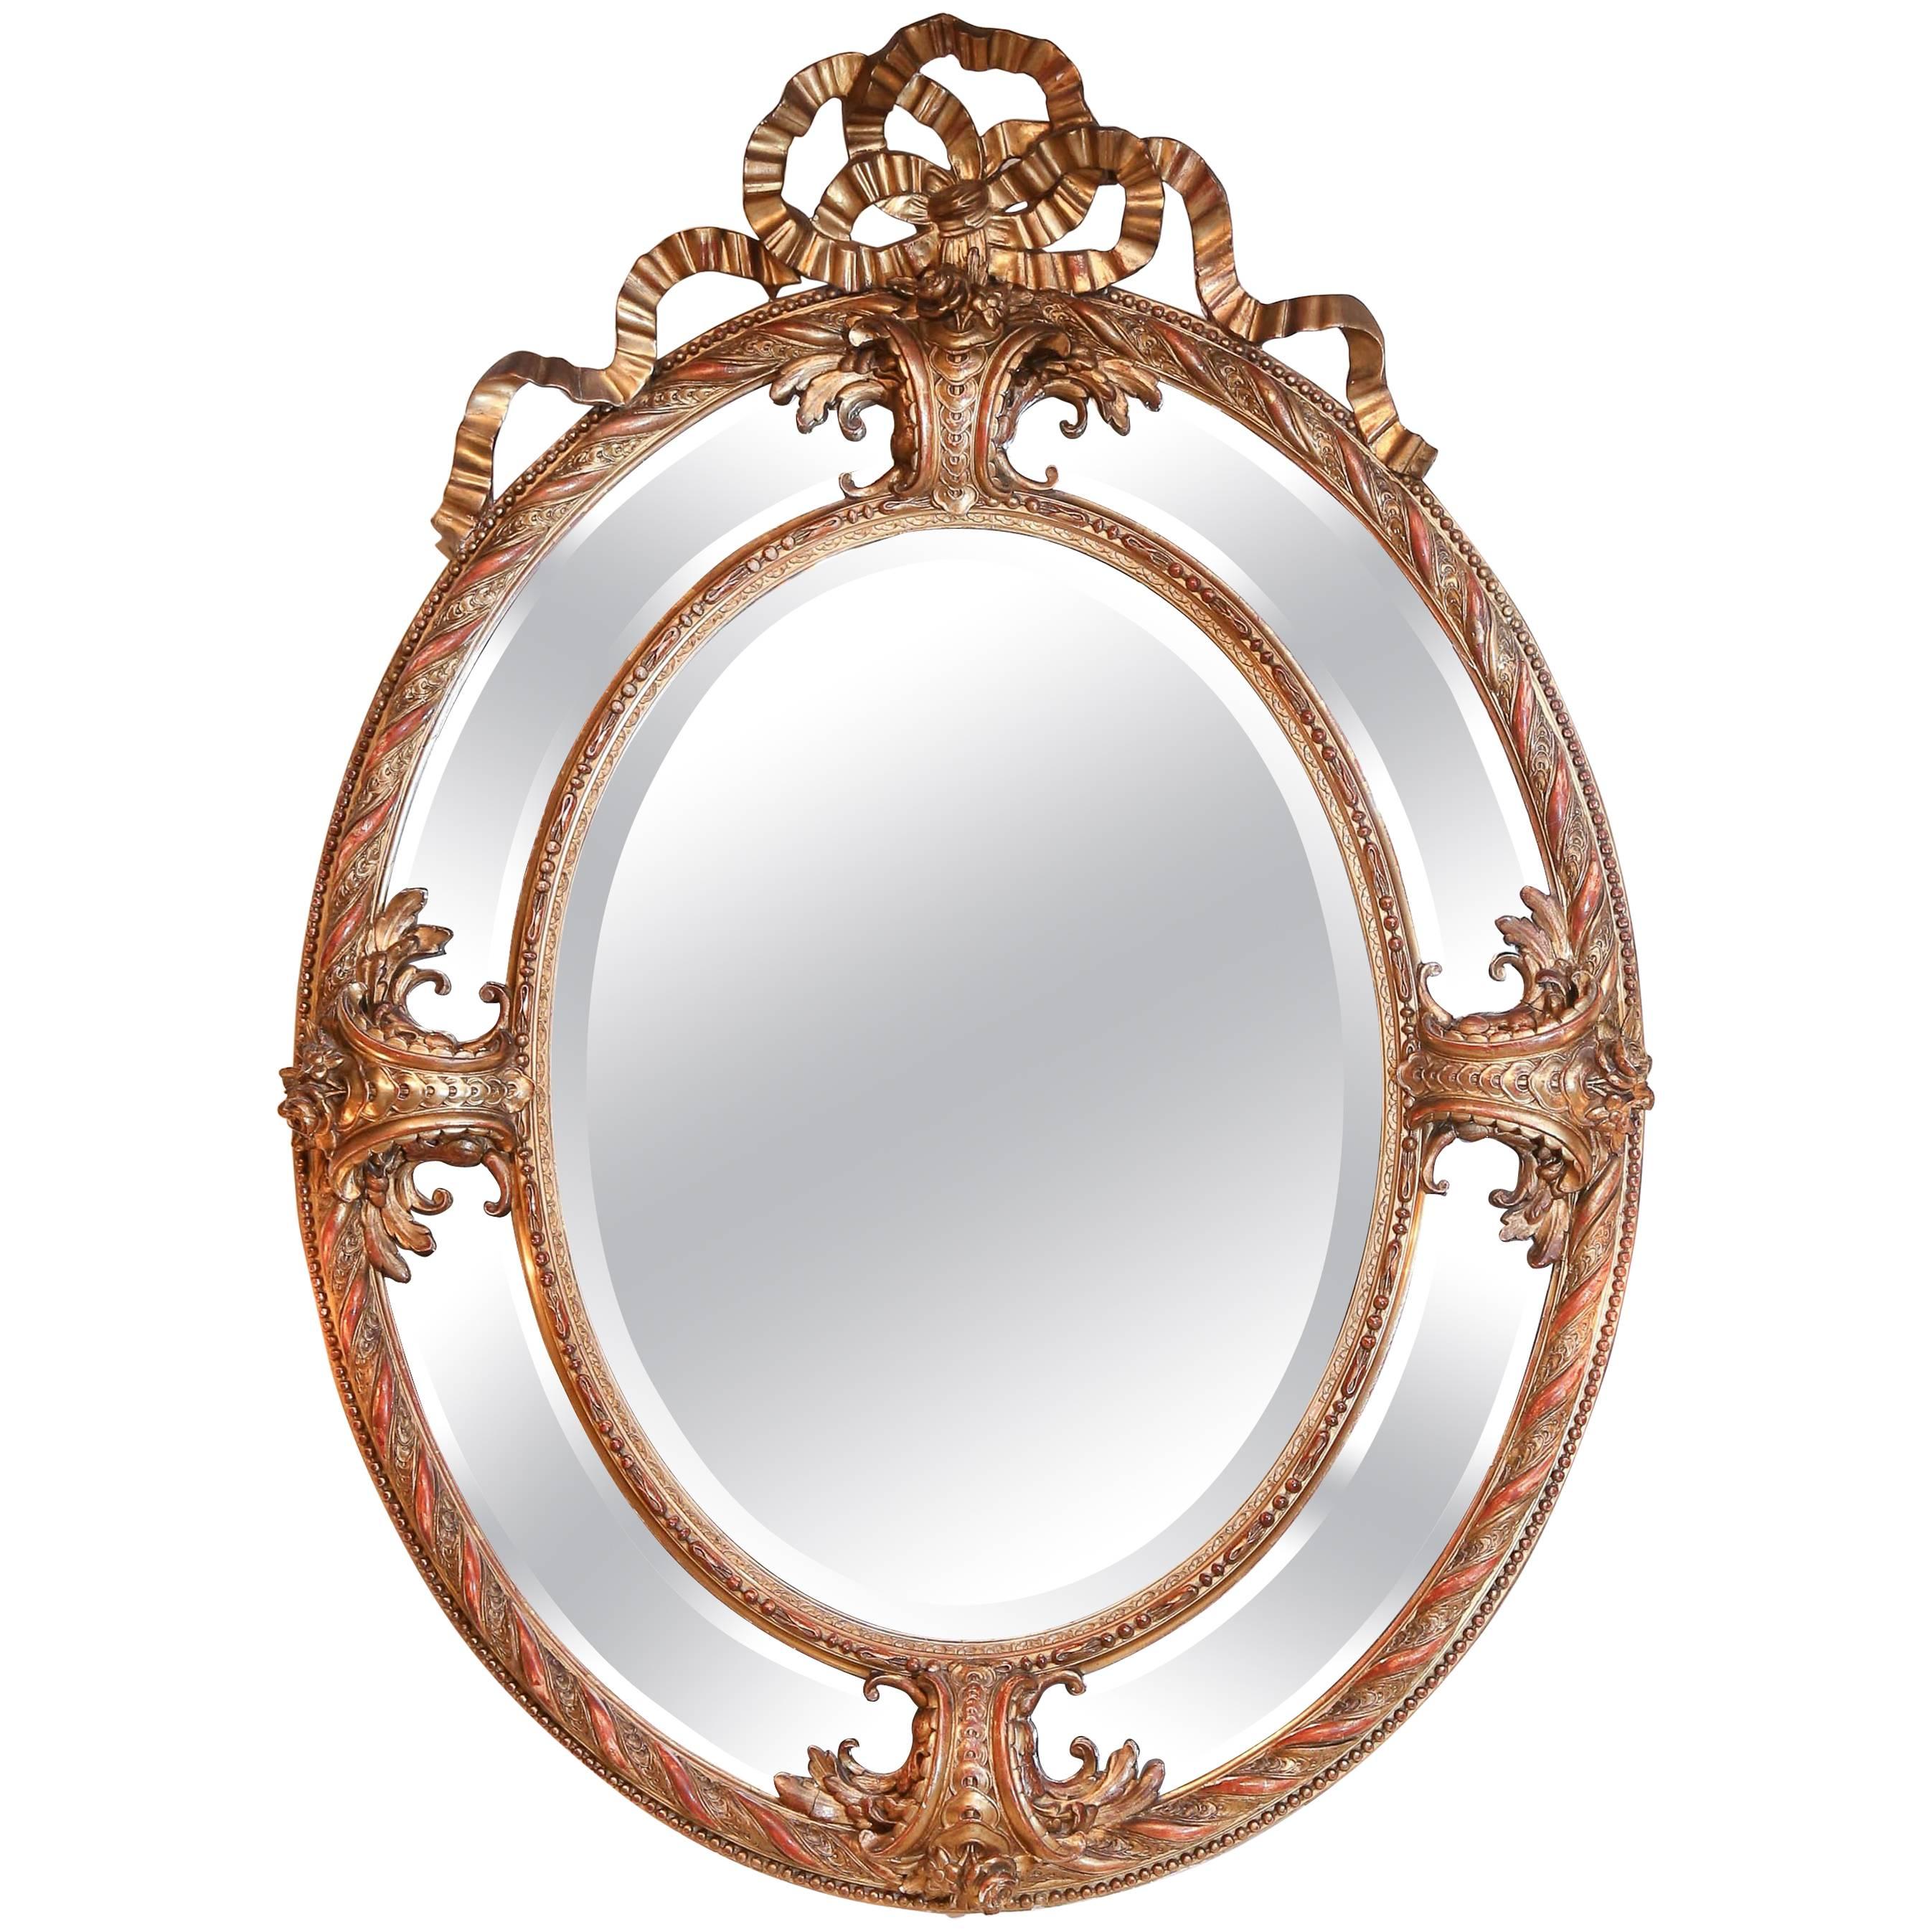 Large French Oval Cushion Mirror in Giltwood, 19th Century With Beveled Mirrors For Sale